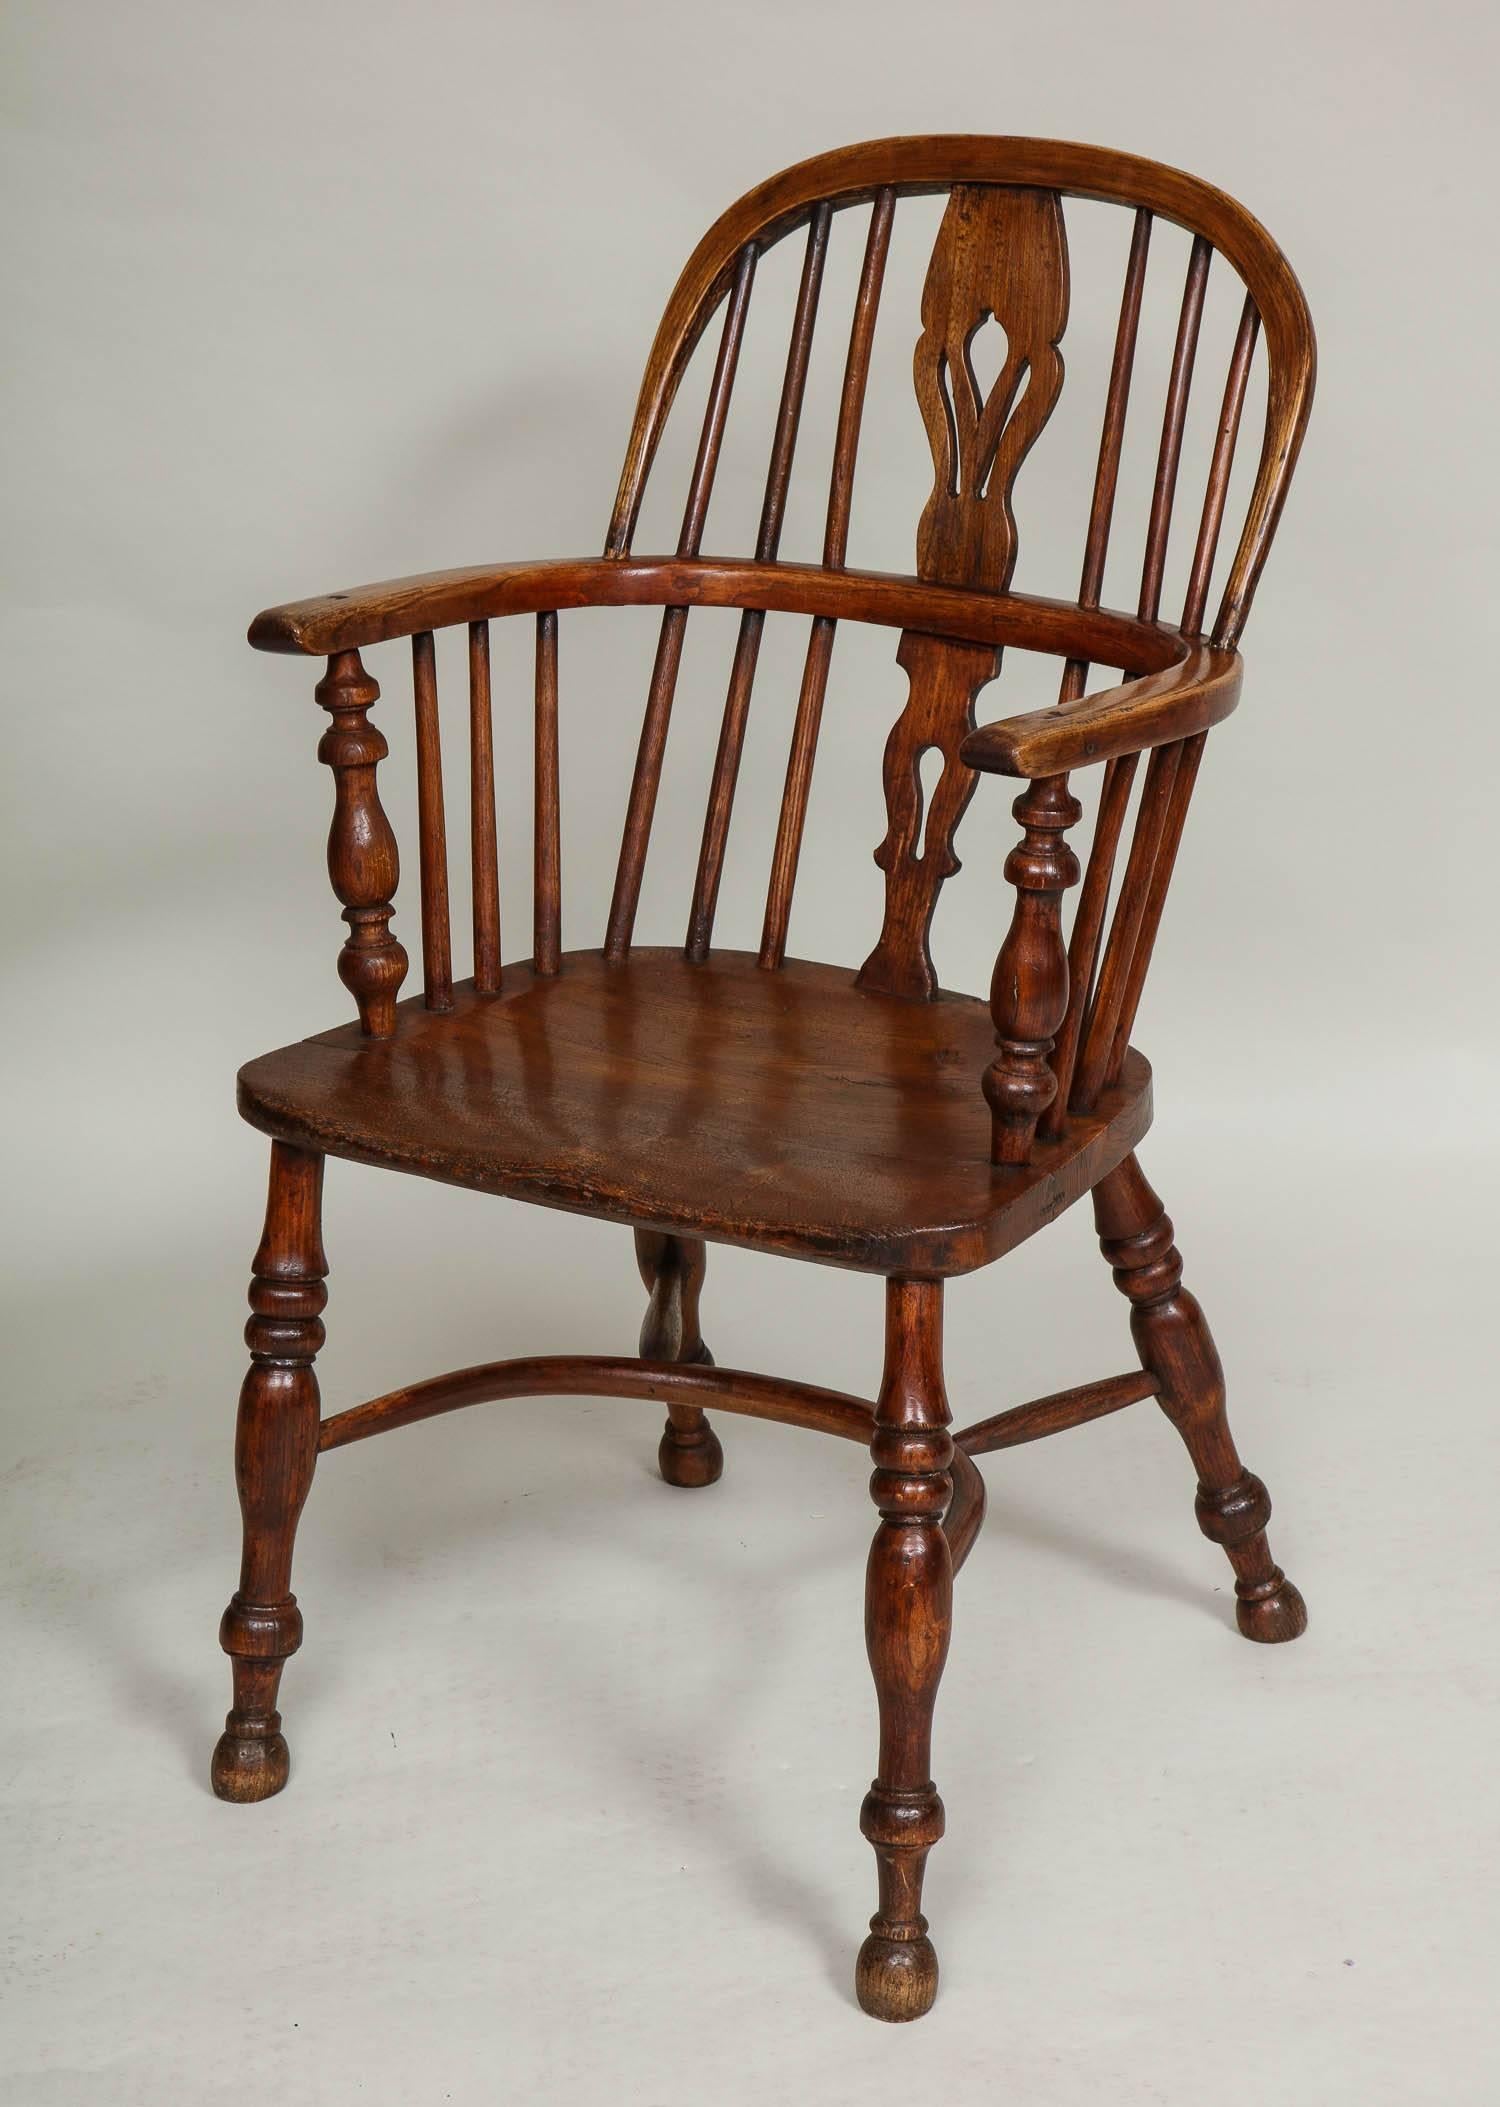 Good assembled set of eight English ash and elm windsor hoop back armchairs having tulip pierced fruitwood backsplats, bent hoop backs and continuous arms, each saddled seat fashioned from a single elm plank, standing on boldly turned legs and